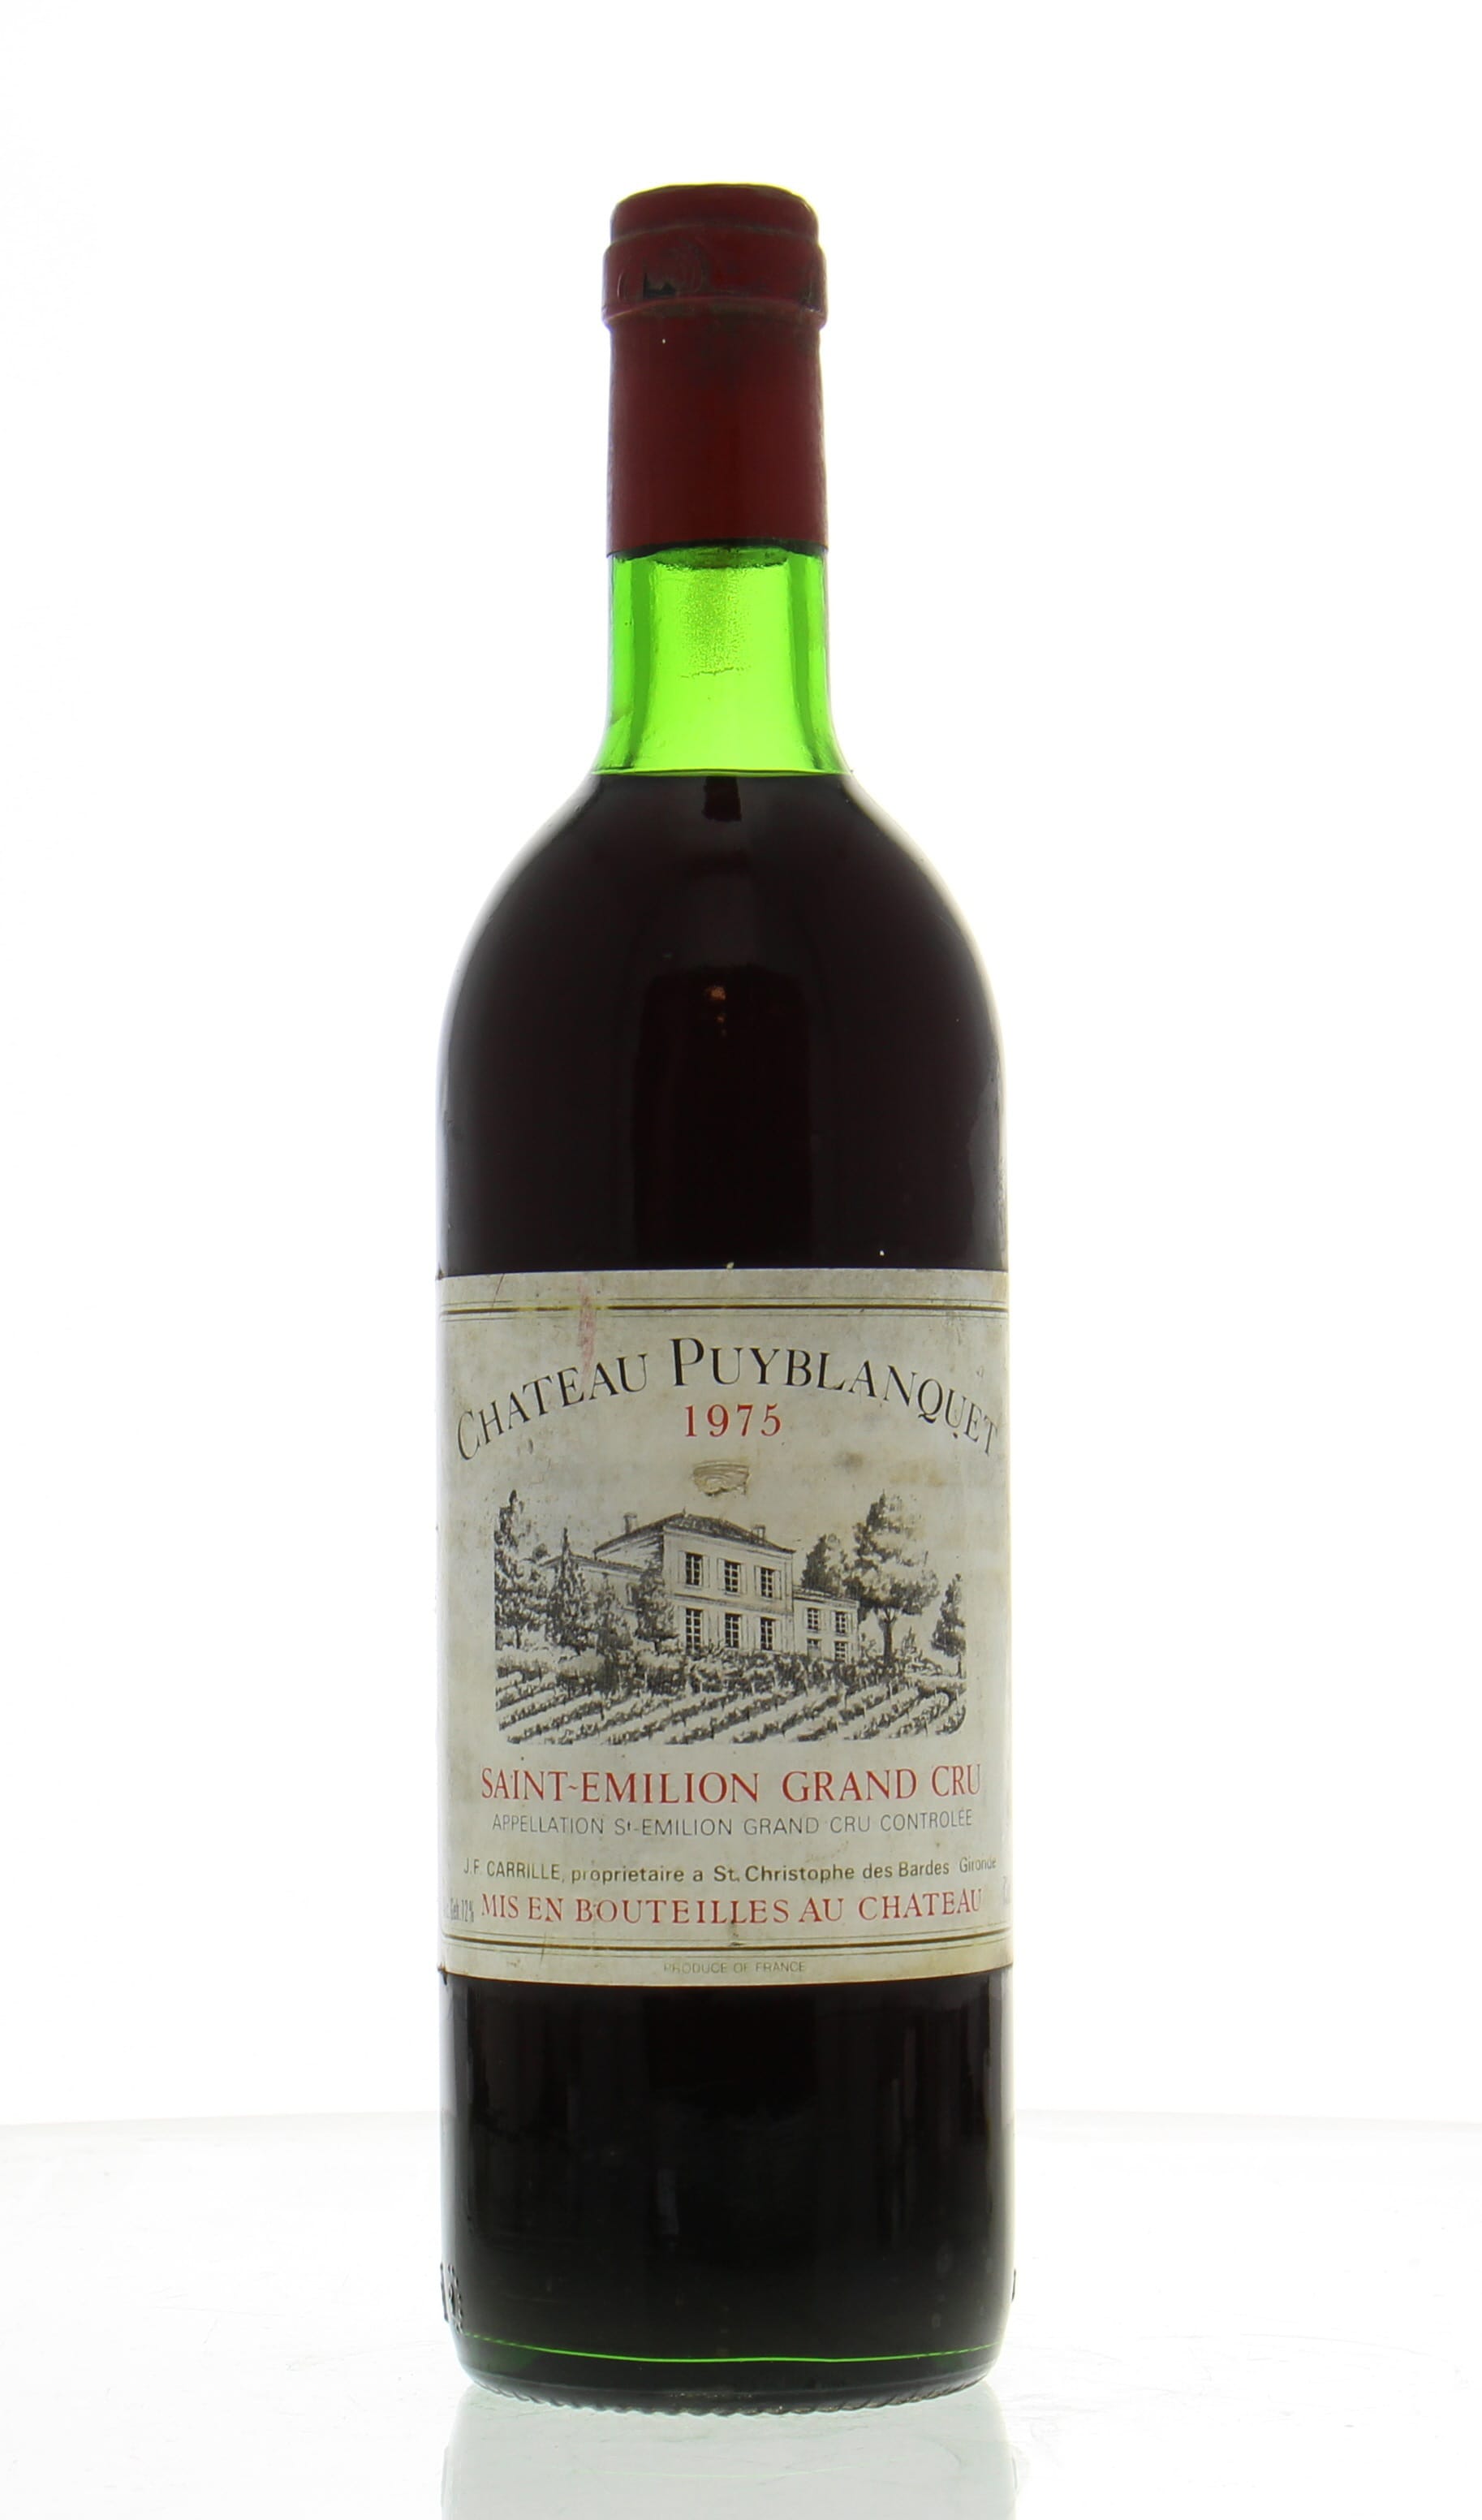 Chateau Puyblanquet - Chateau Puyblanquet 1975 Perfect